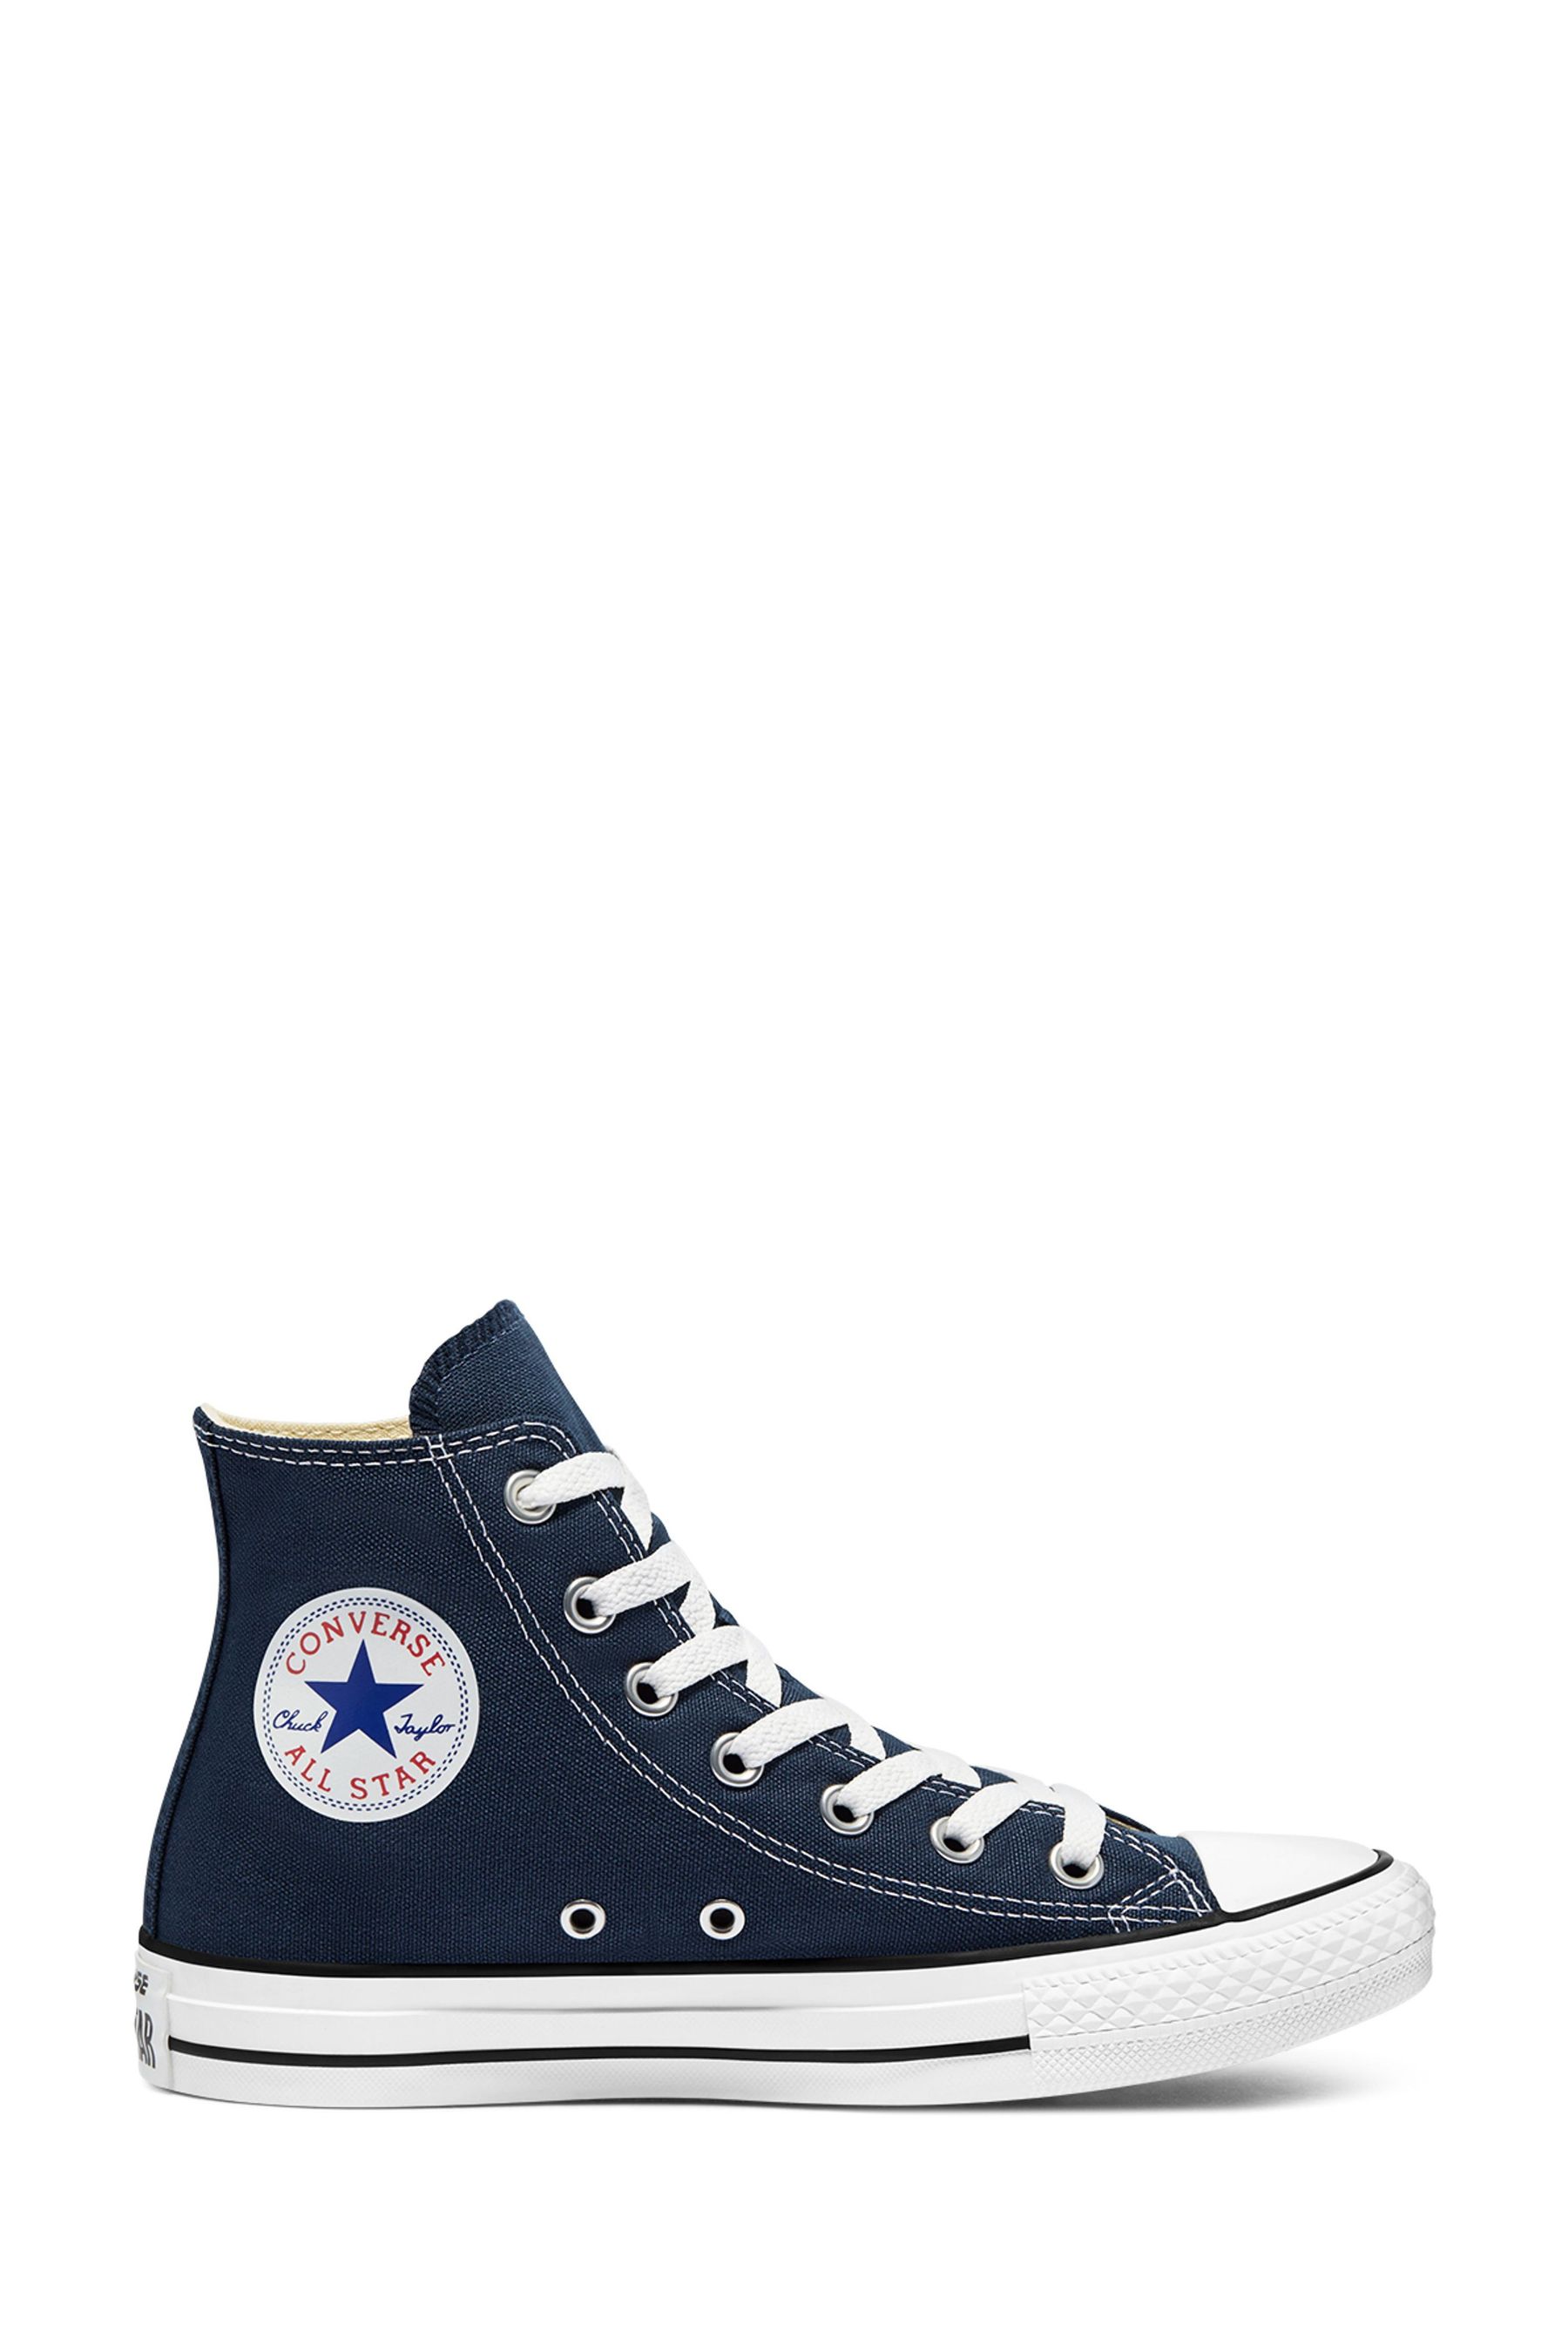 Buy Converse Navy Regular Fit Chuck Taylor All Star High Trainers from ...